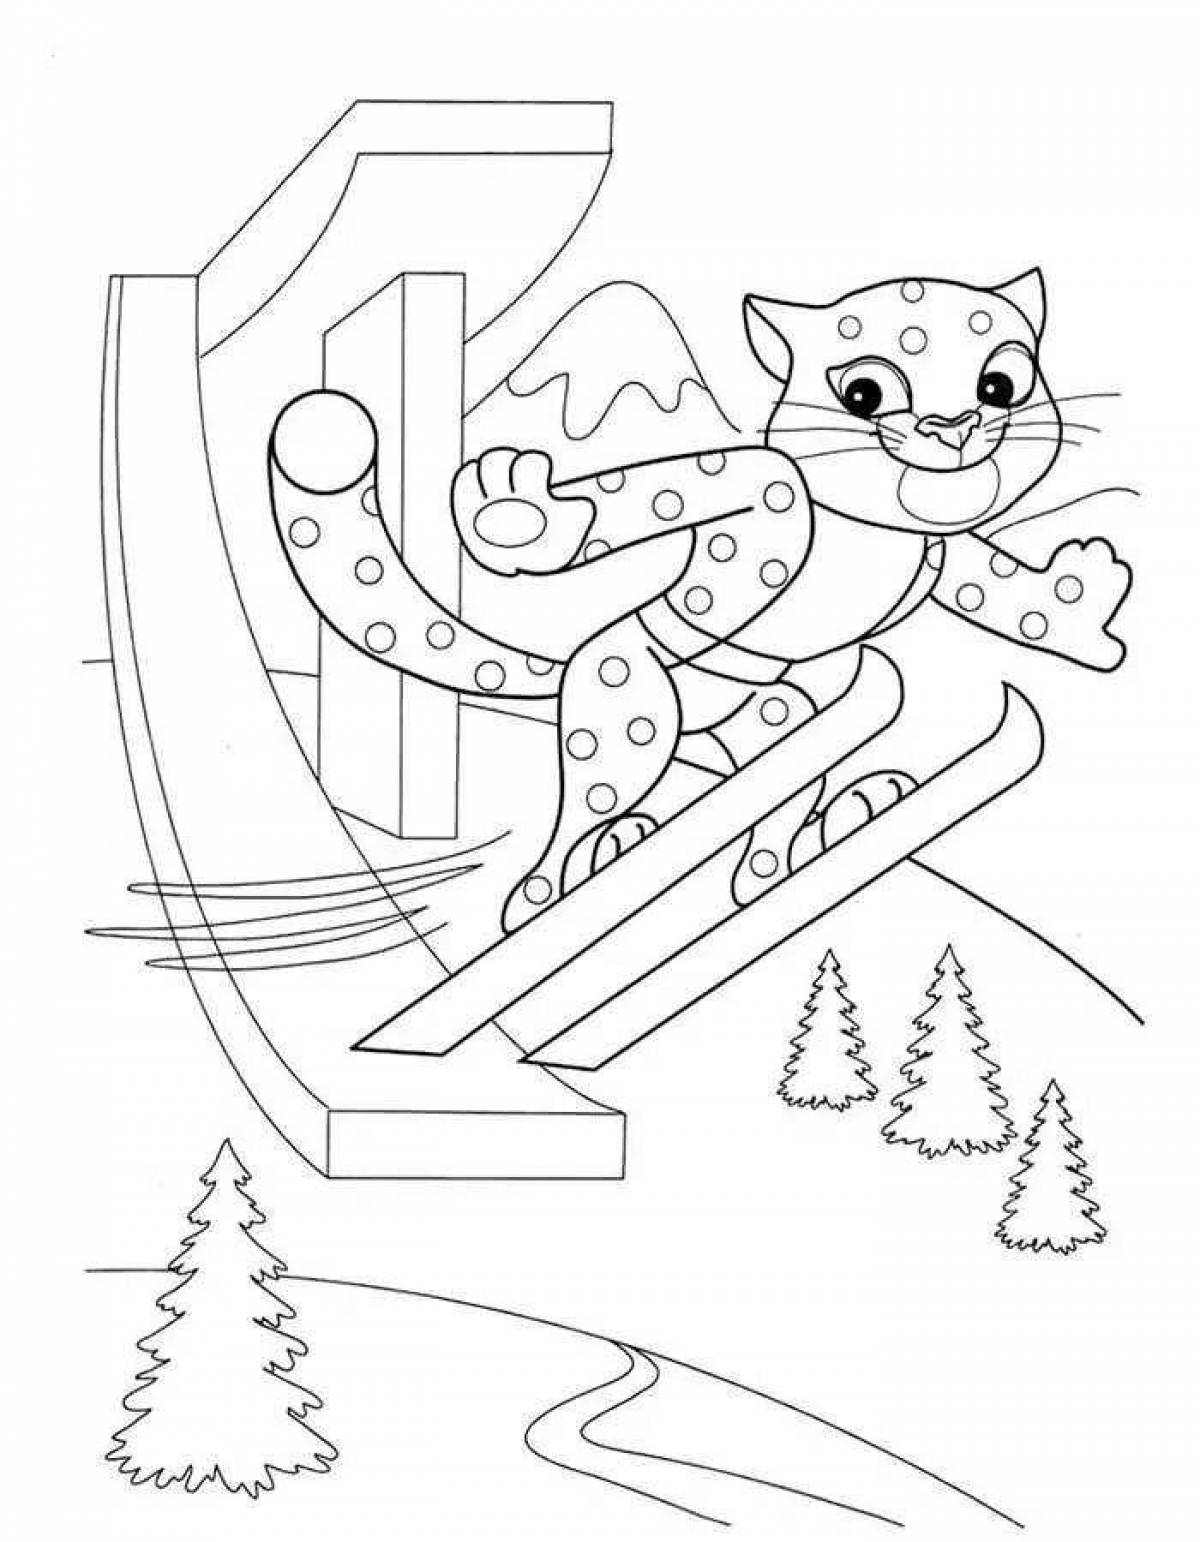 Tempting olympic winter sports coloring page